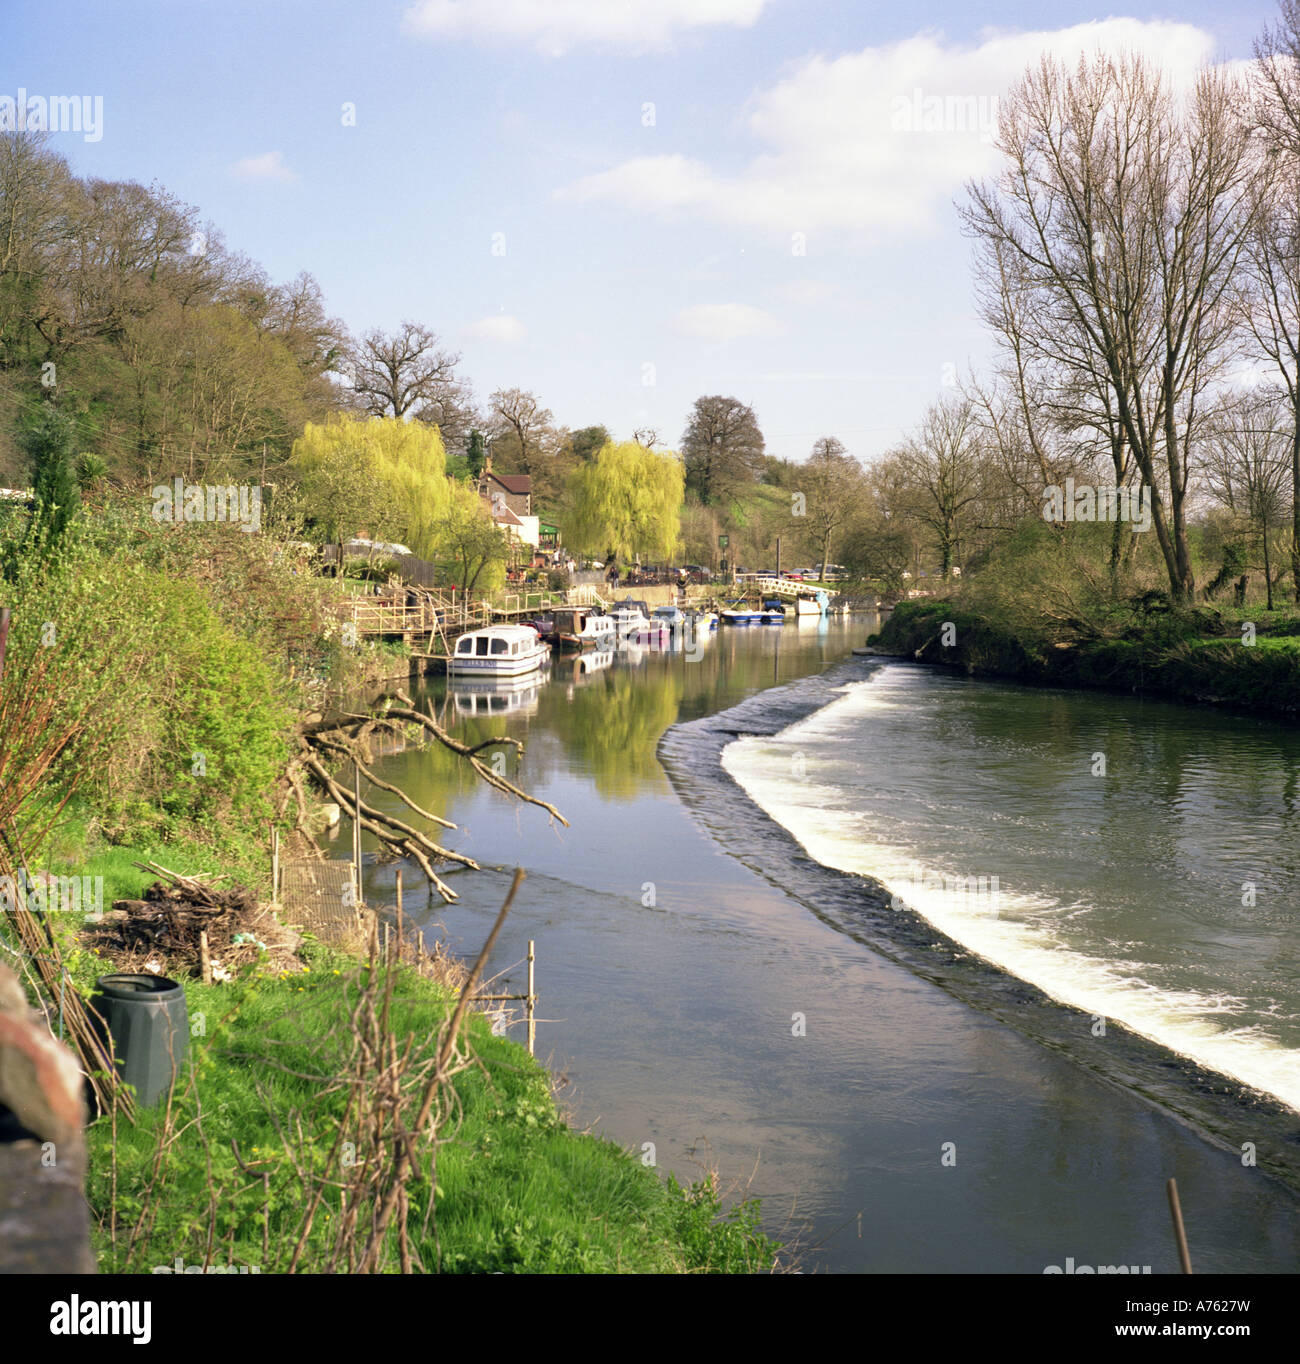 Avon River, Christchurch - Book Tickets & Tours | GetYourGuide